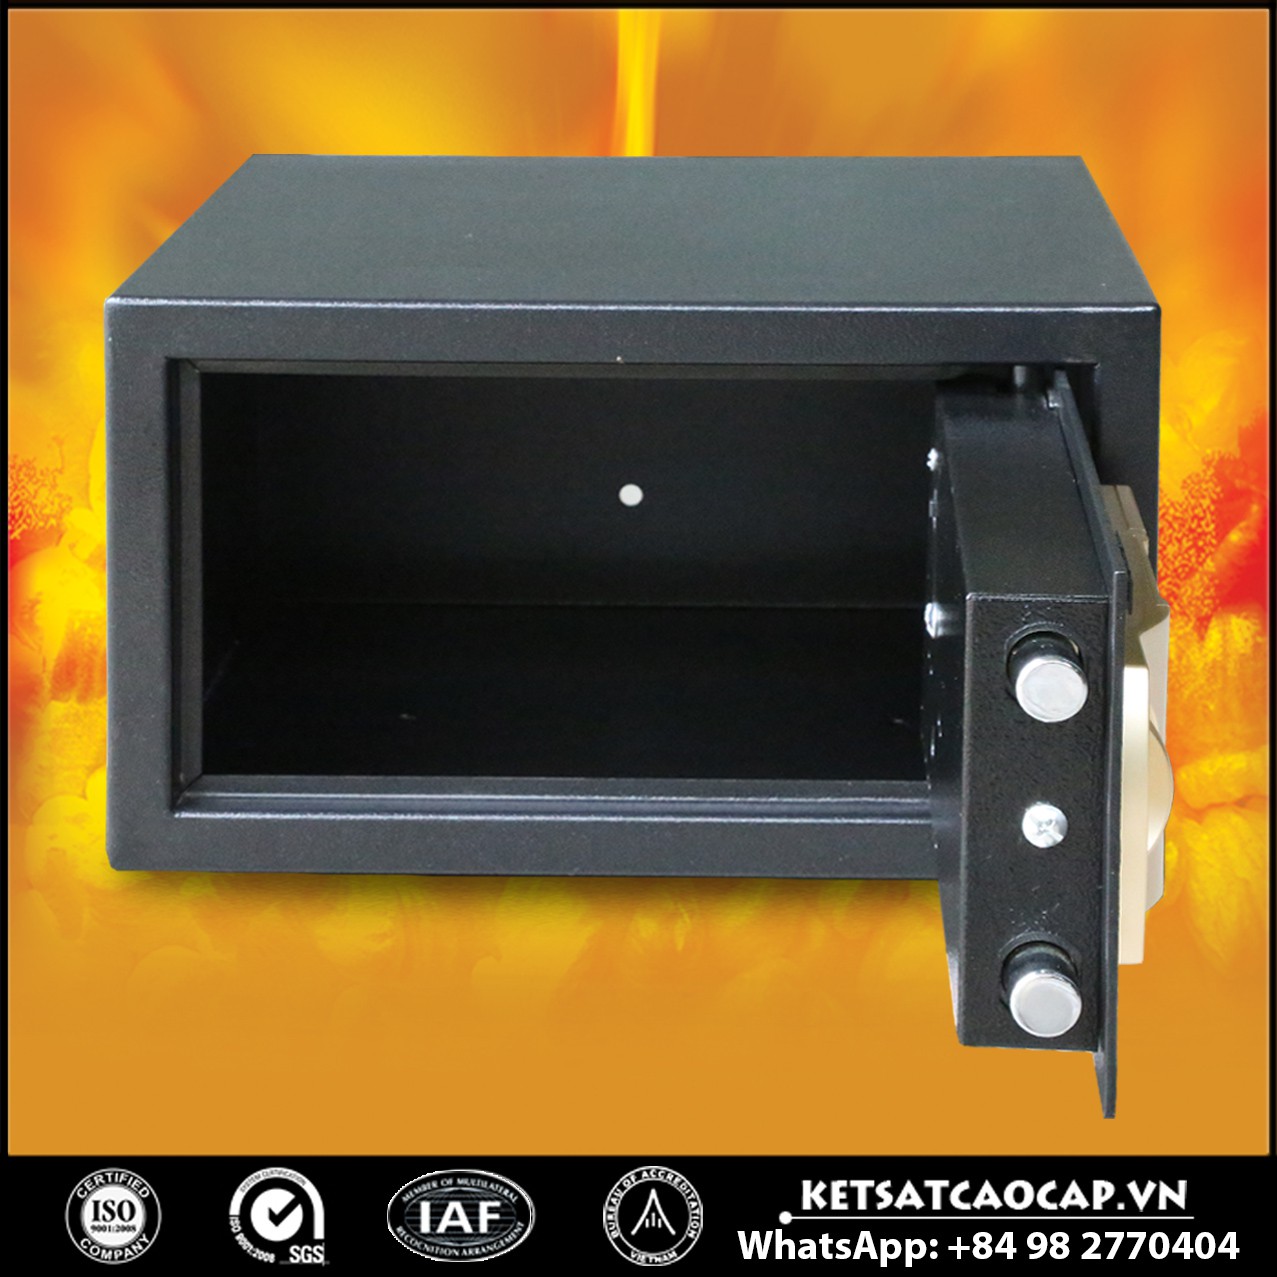 Buy Best Hotel Safe For Home Manufacturers & Suppliers‎, Safes For Hotels From Ireland's